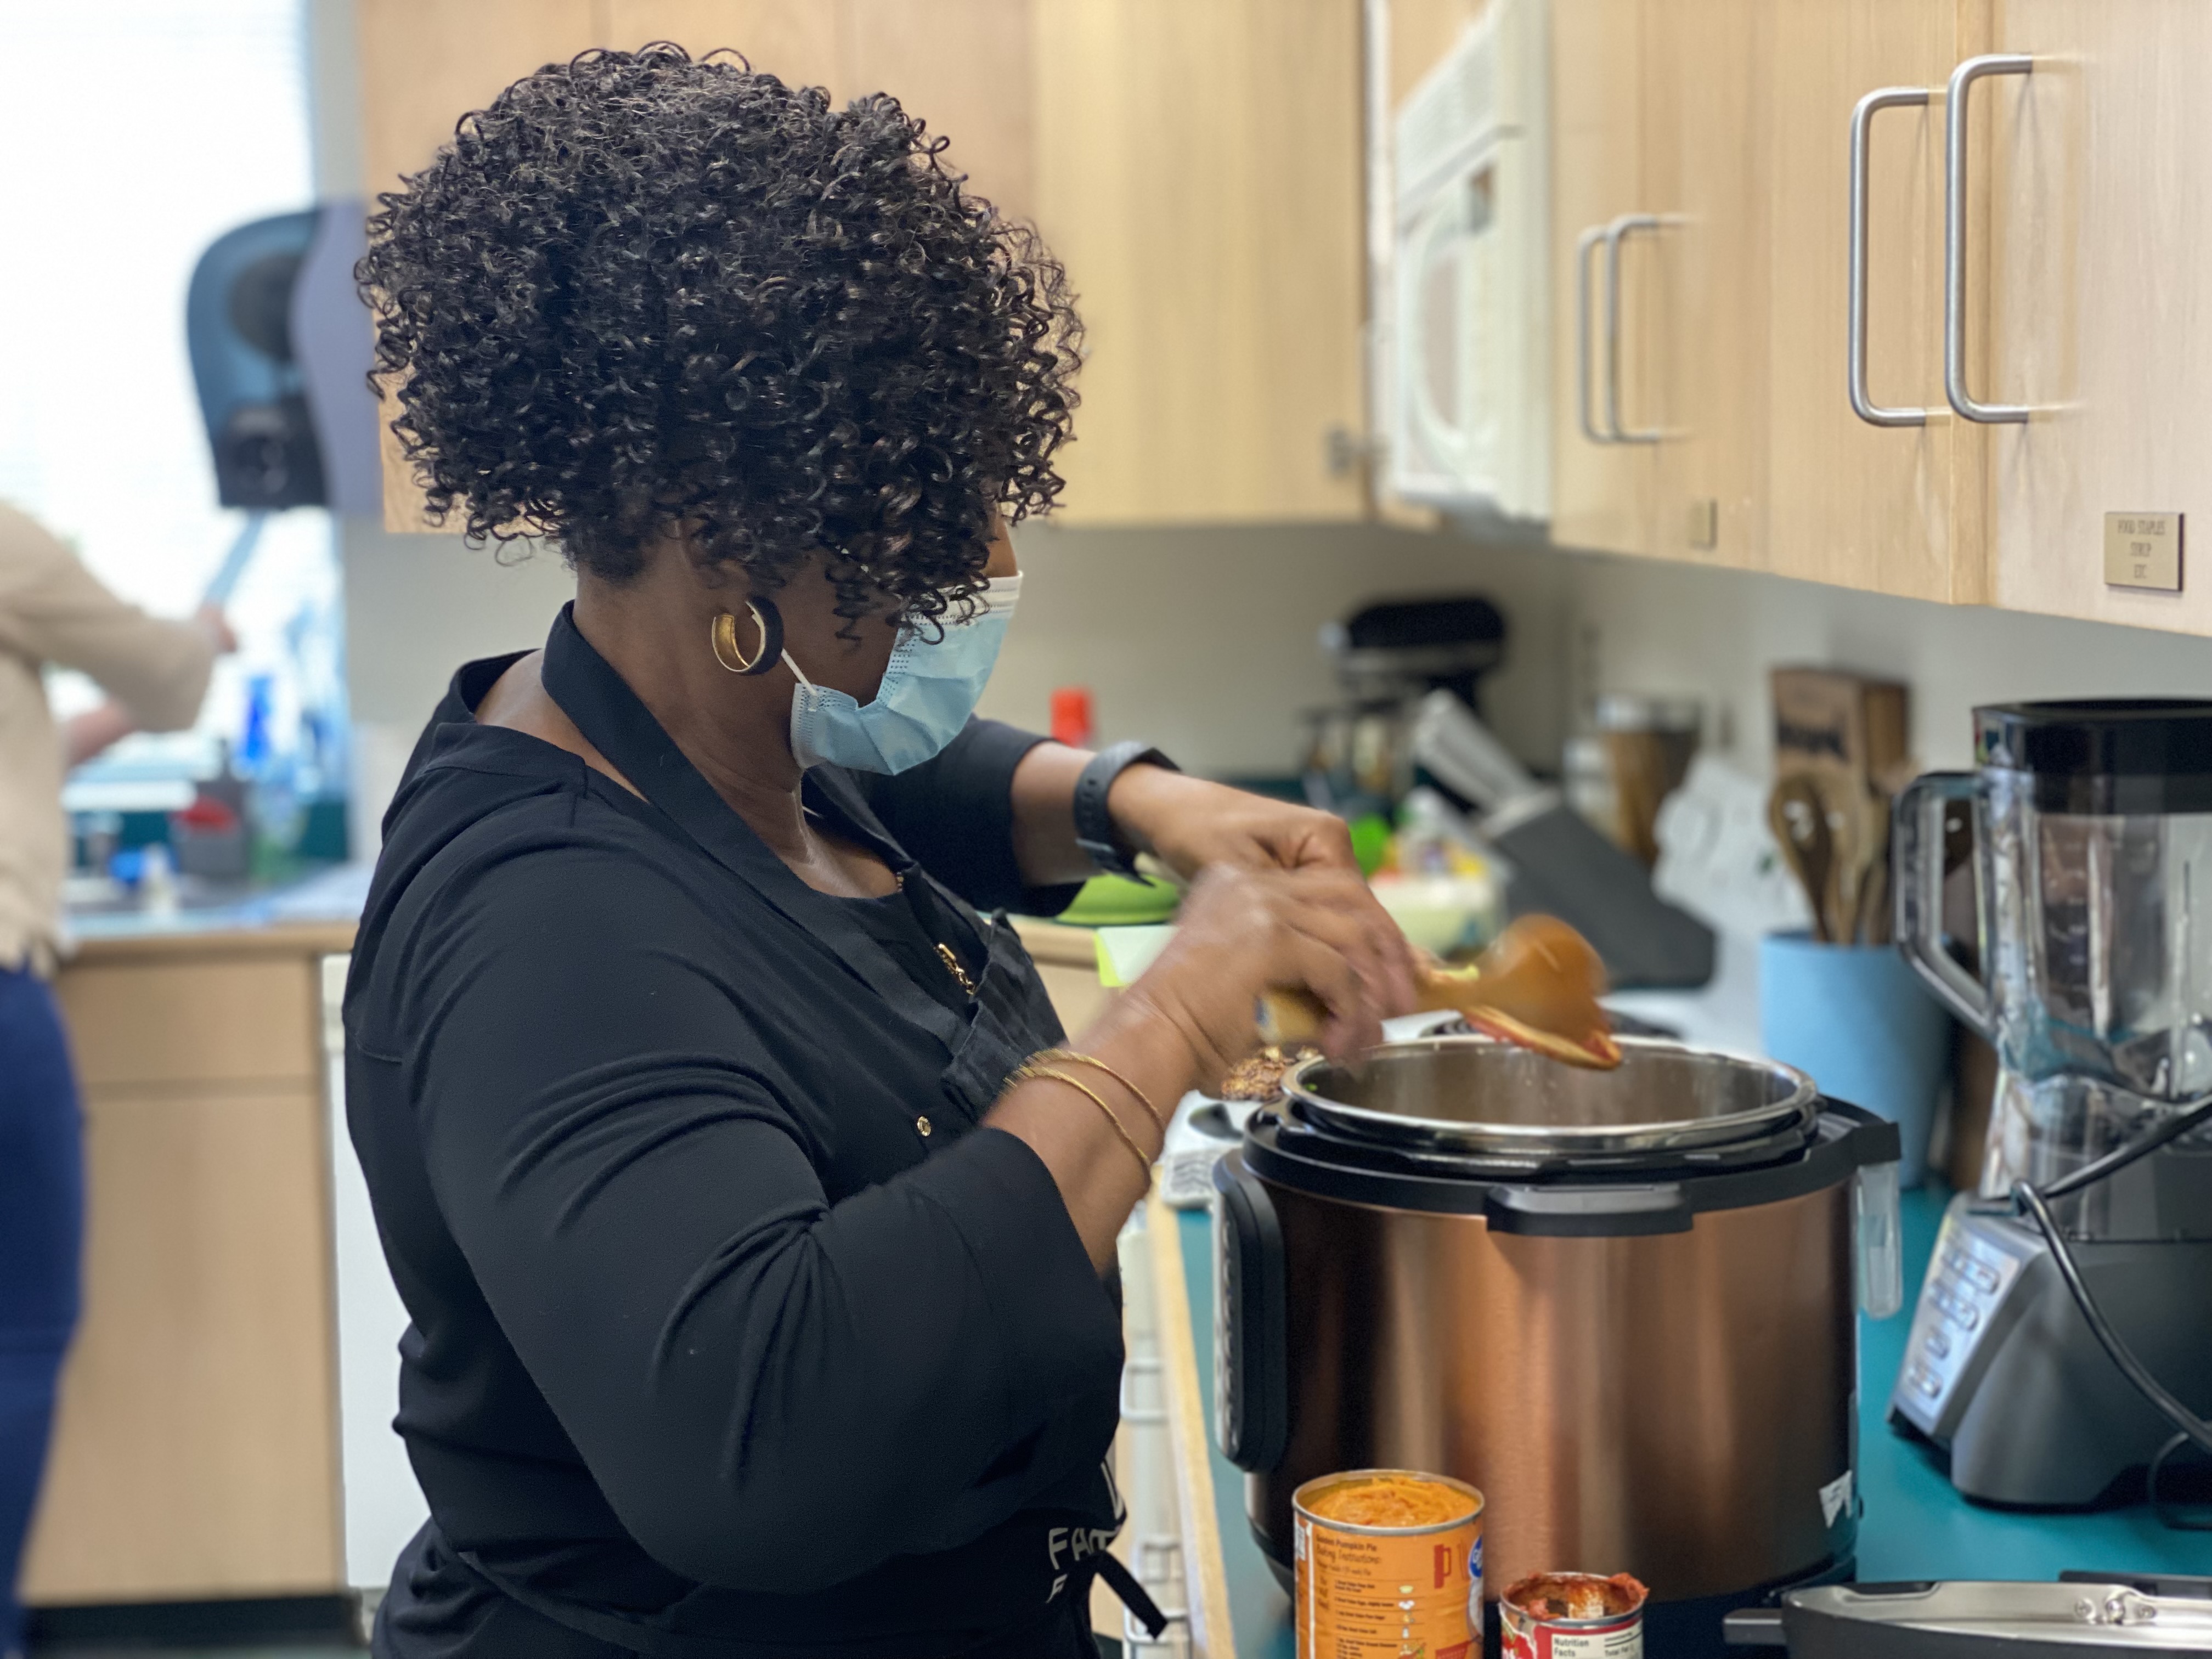 Extension Master Food Volunteer, Laura Vaughan from Leland, testing the Pumpkin Chicken Chili recipe in the electric pressure cooker.